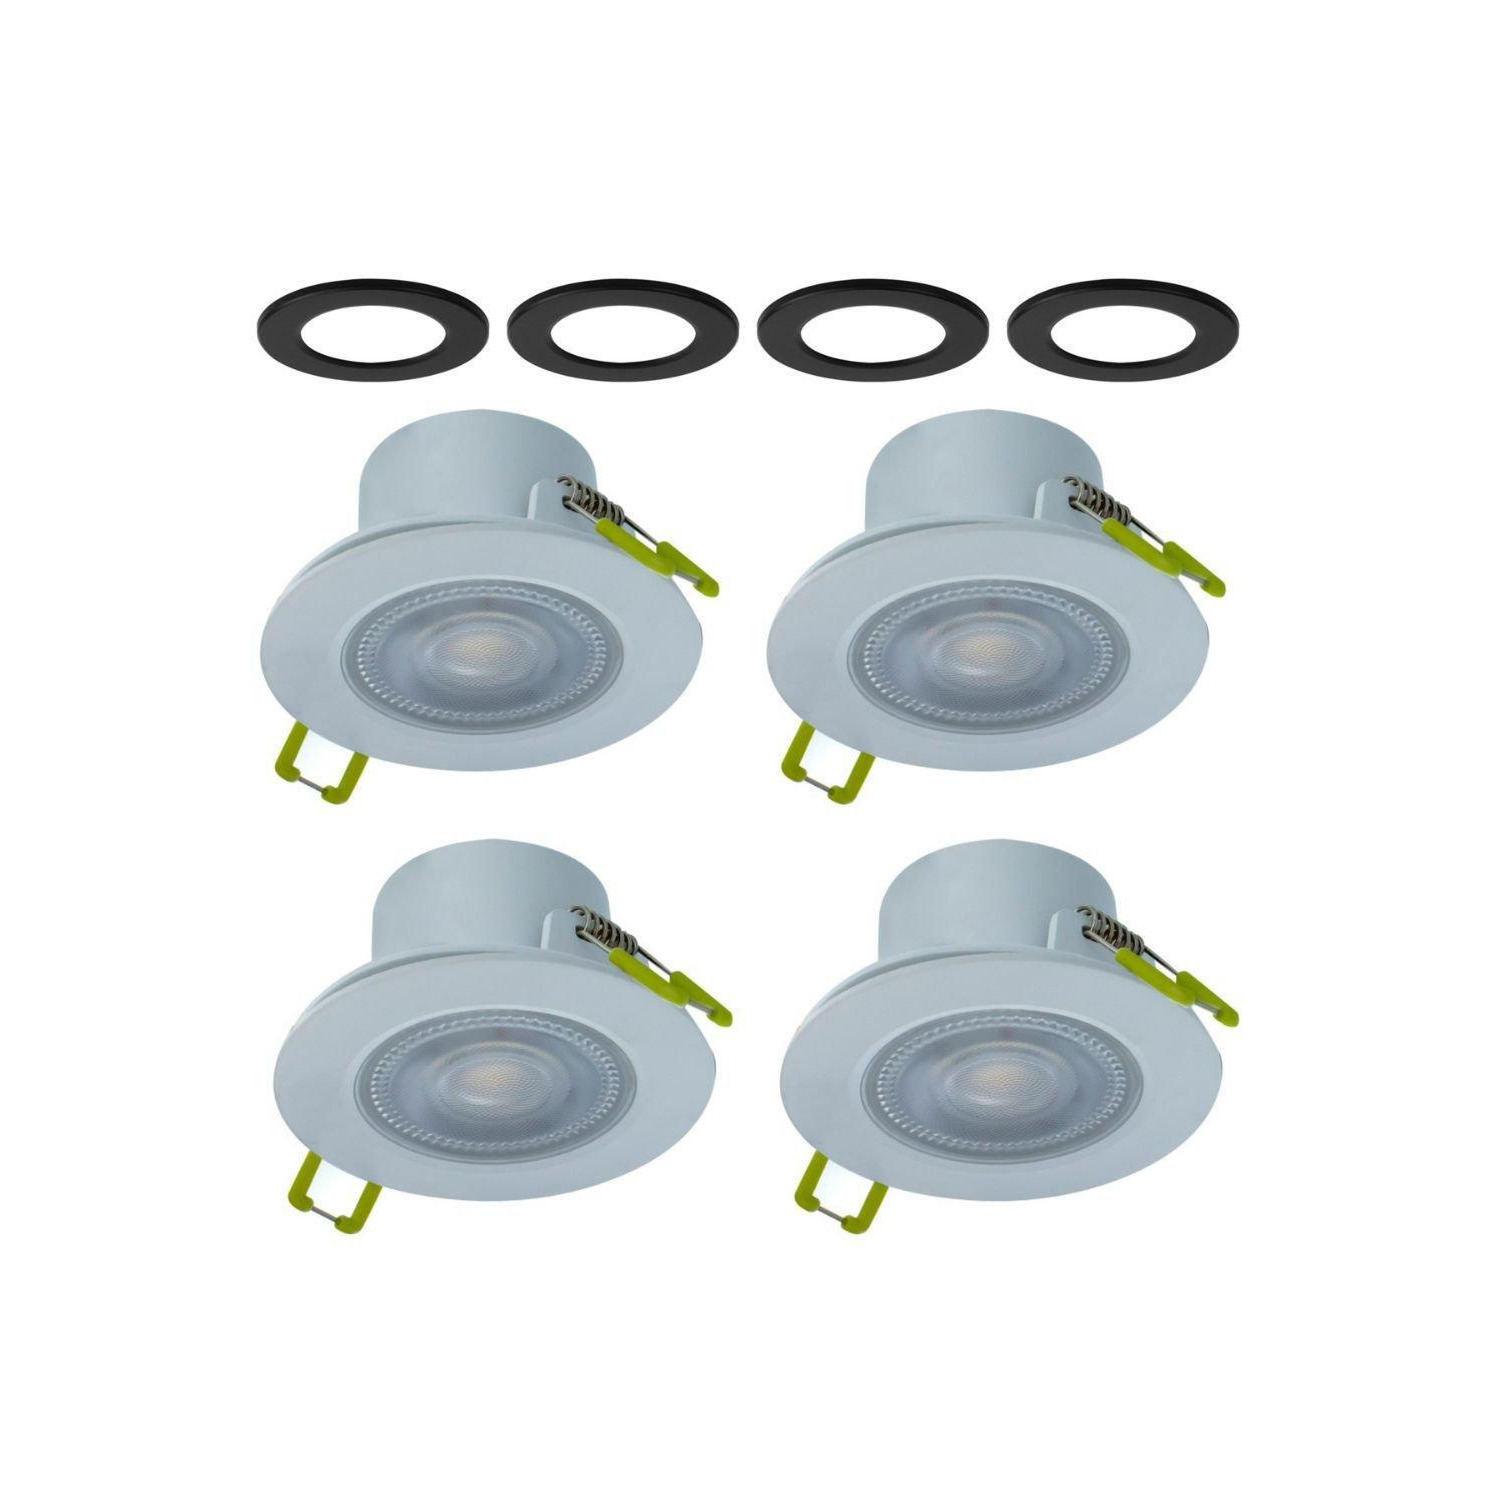 LED Fixed Downlight 5.5W Dimmable 4000K - White (4 Pack) with Black Bezels - image 1